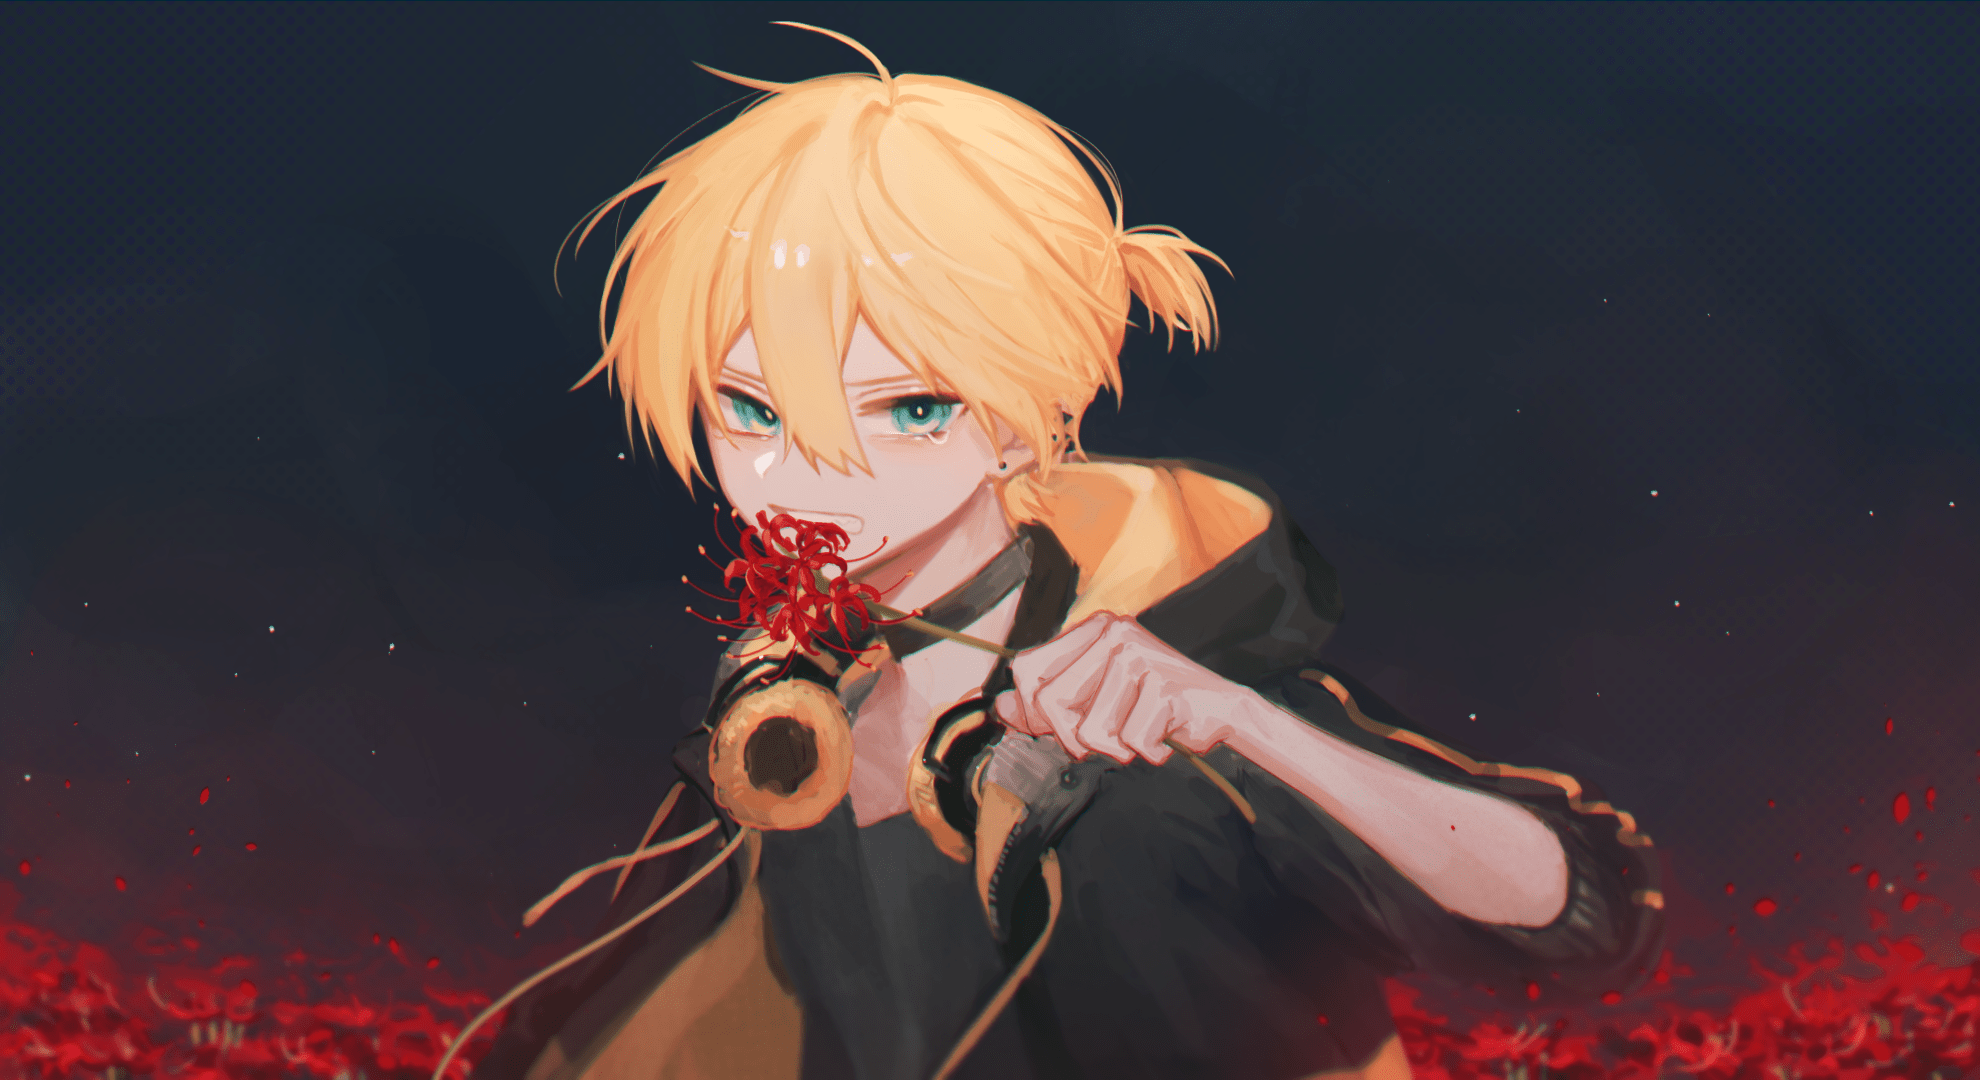 Anime wallpaper of a male anime character with blonde hair and blue eyes holding a flower in his mouth - 